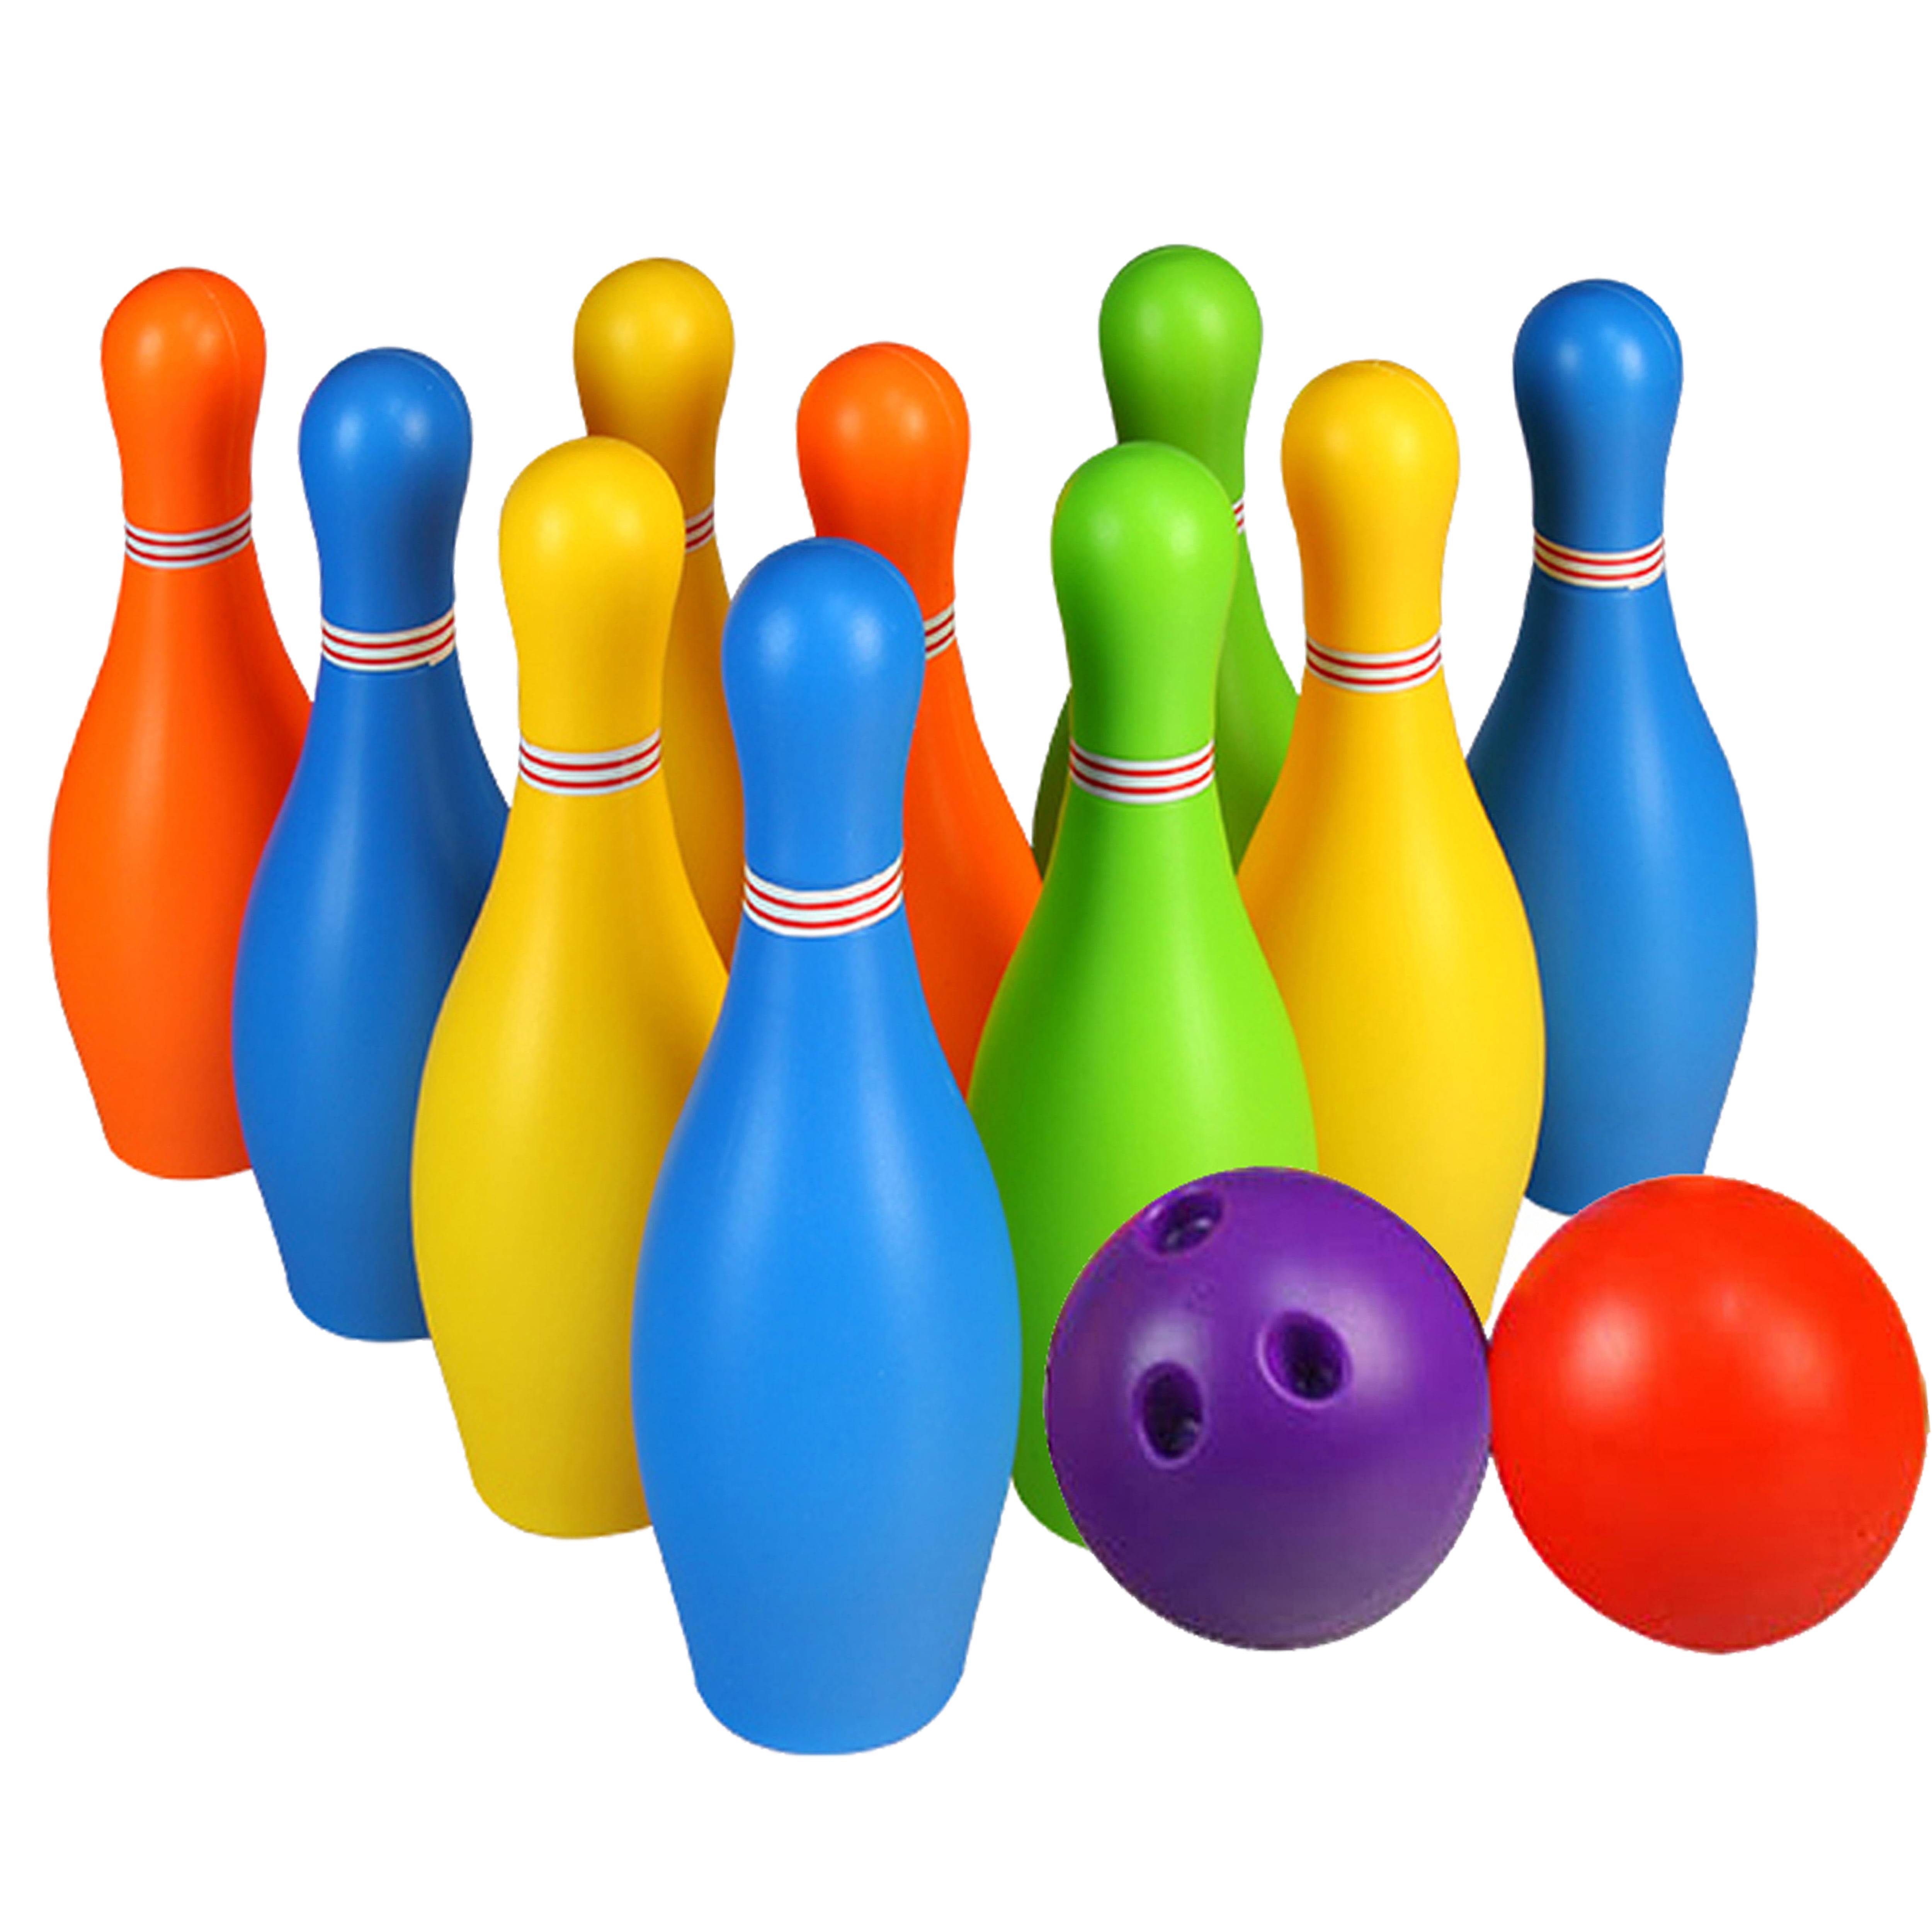 10 Pin Skittle 2 Balls Bowling Set Indoor Outdoor Party Game Toy Kid Child Color 